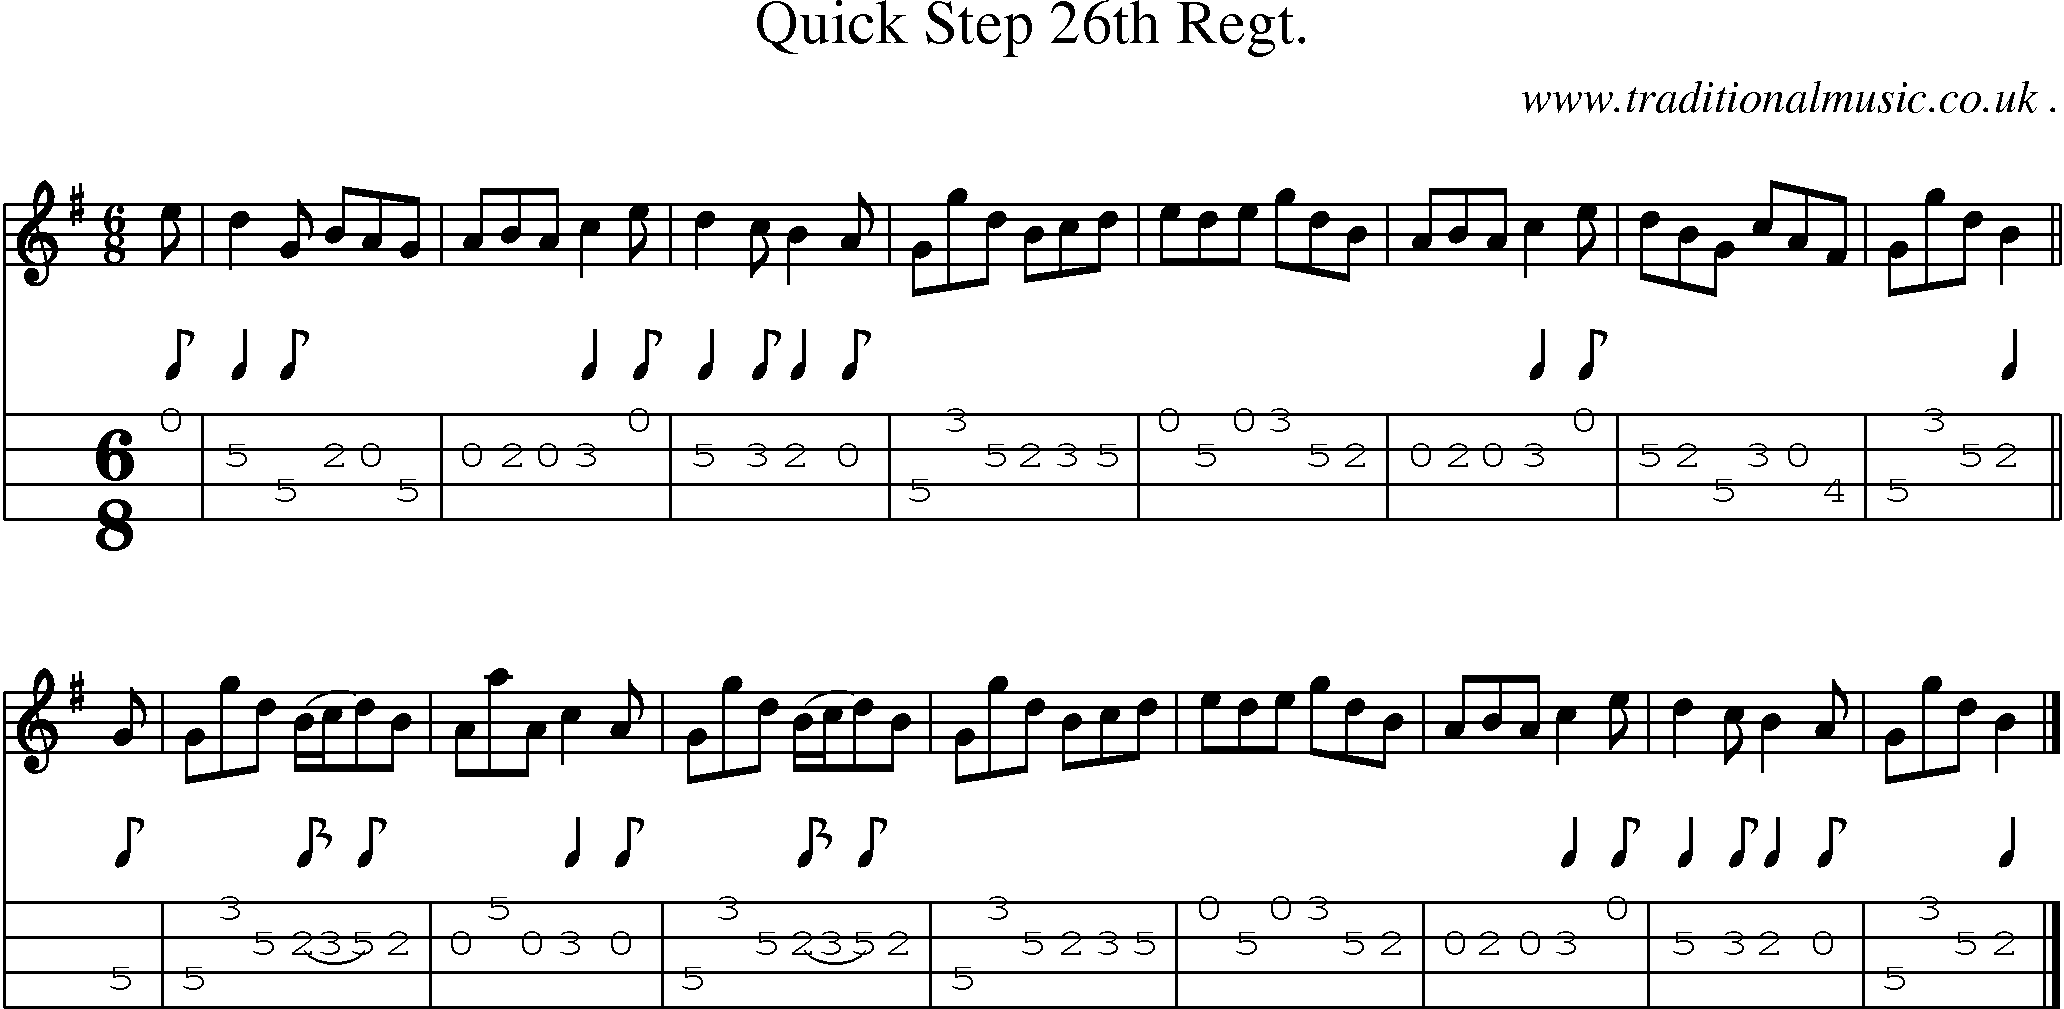 Sheet-music  score, Chords and Mandolin Tabs for Quick Step 26th Regt